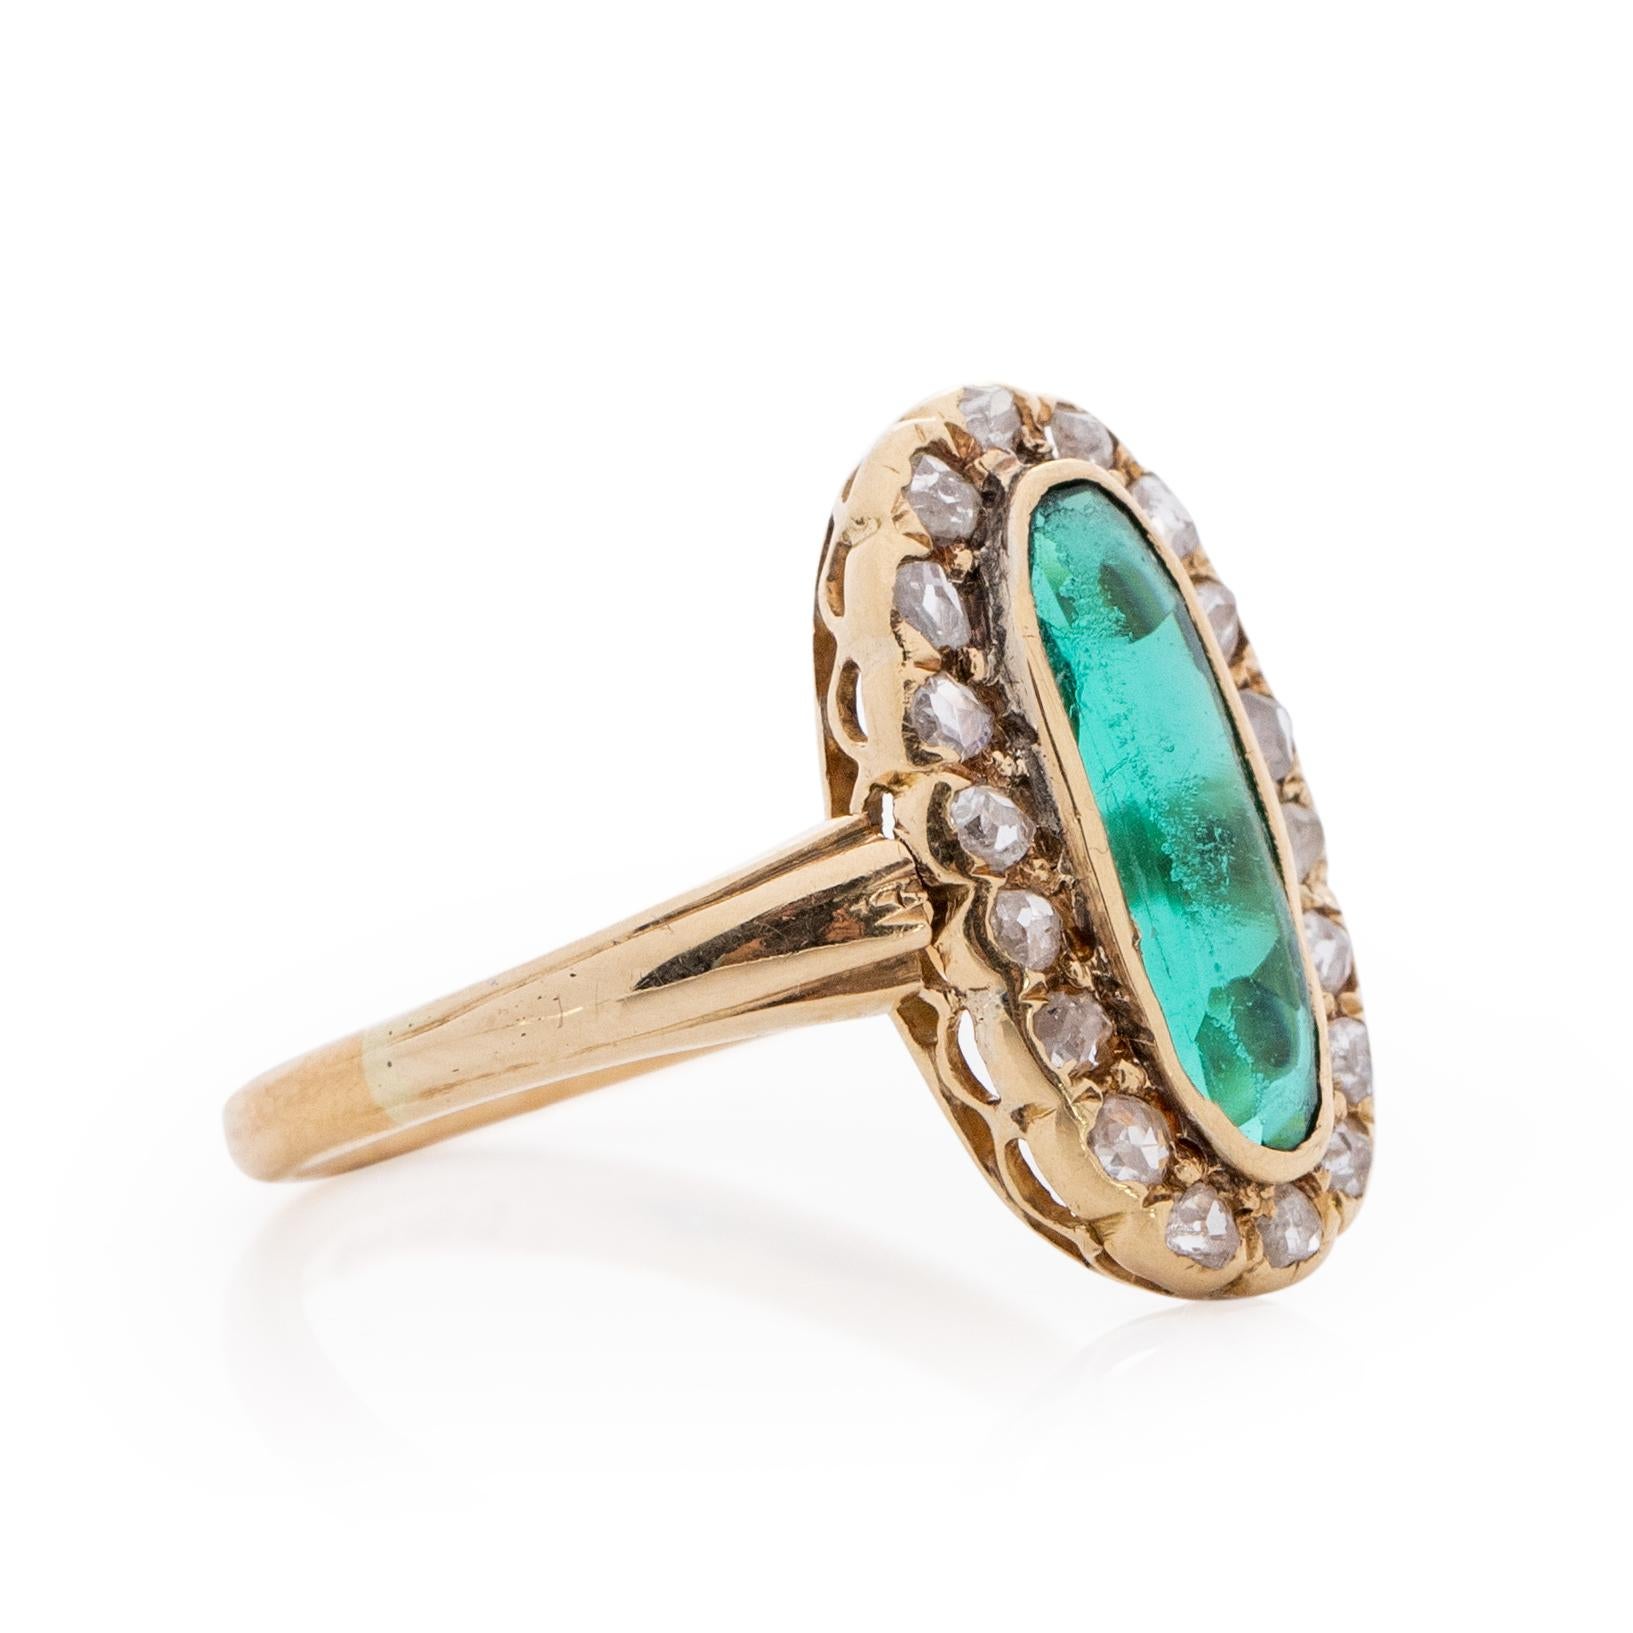 This showstopper is simple, timeless and elegant all at once. Crafted in beautiful 22K Yellow Gold sits a breathtaking elongated green gem, the hue of the gem is vibrant and full of life. Surrounding the gem is a halo of 19 single cut diamonds,